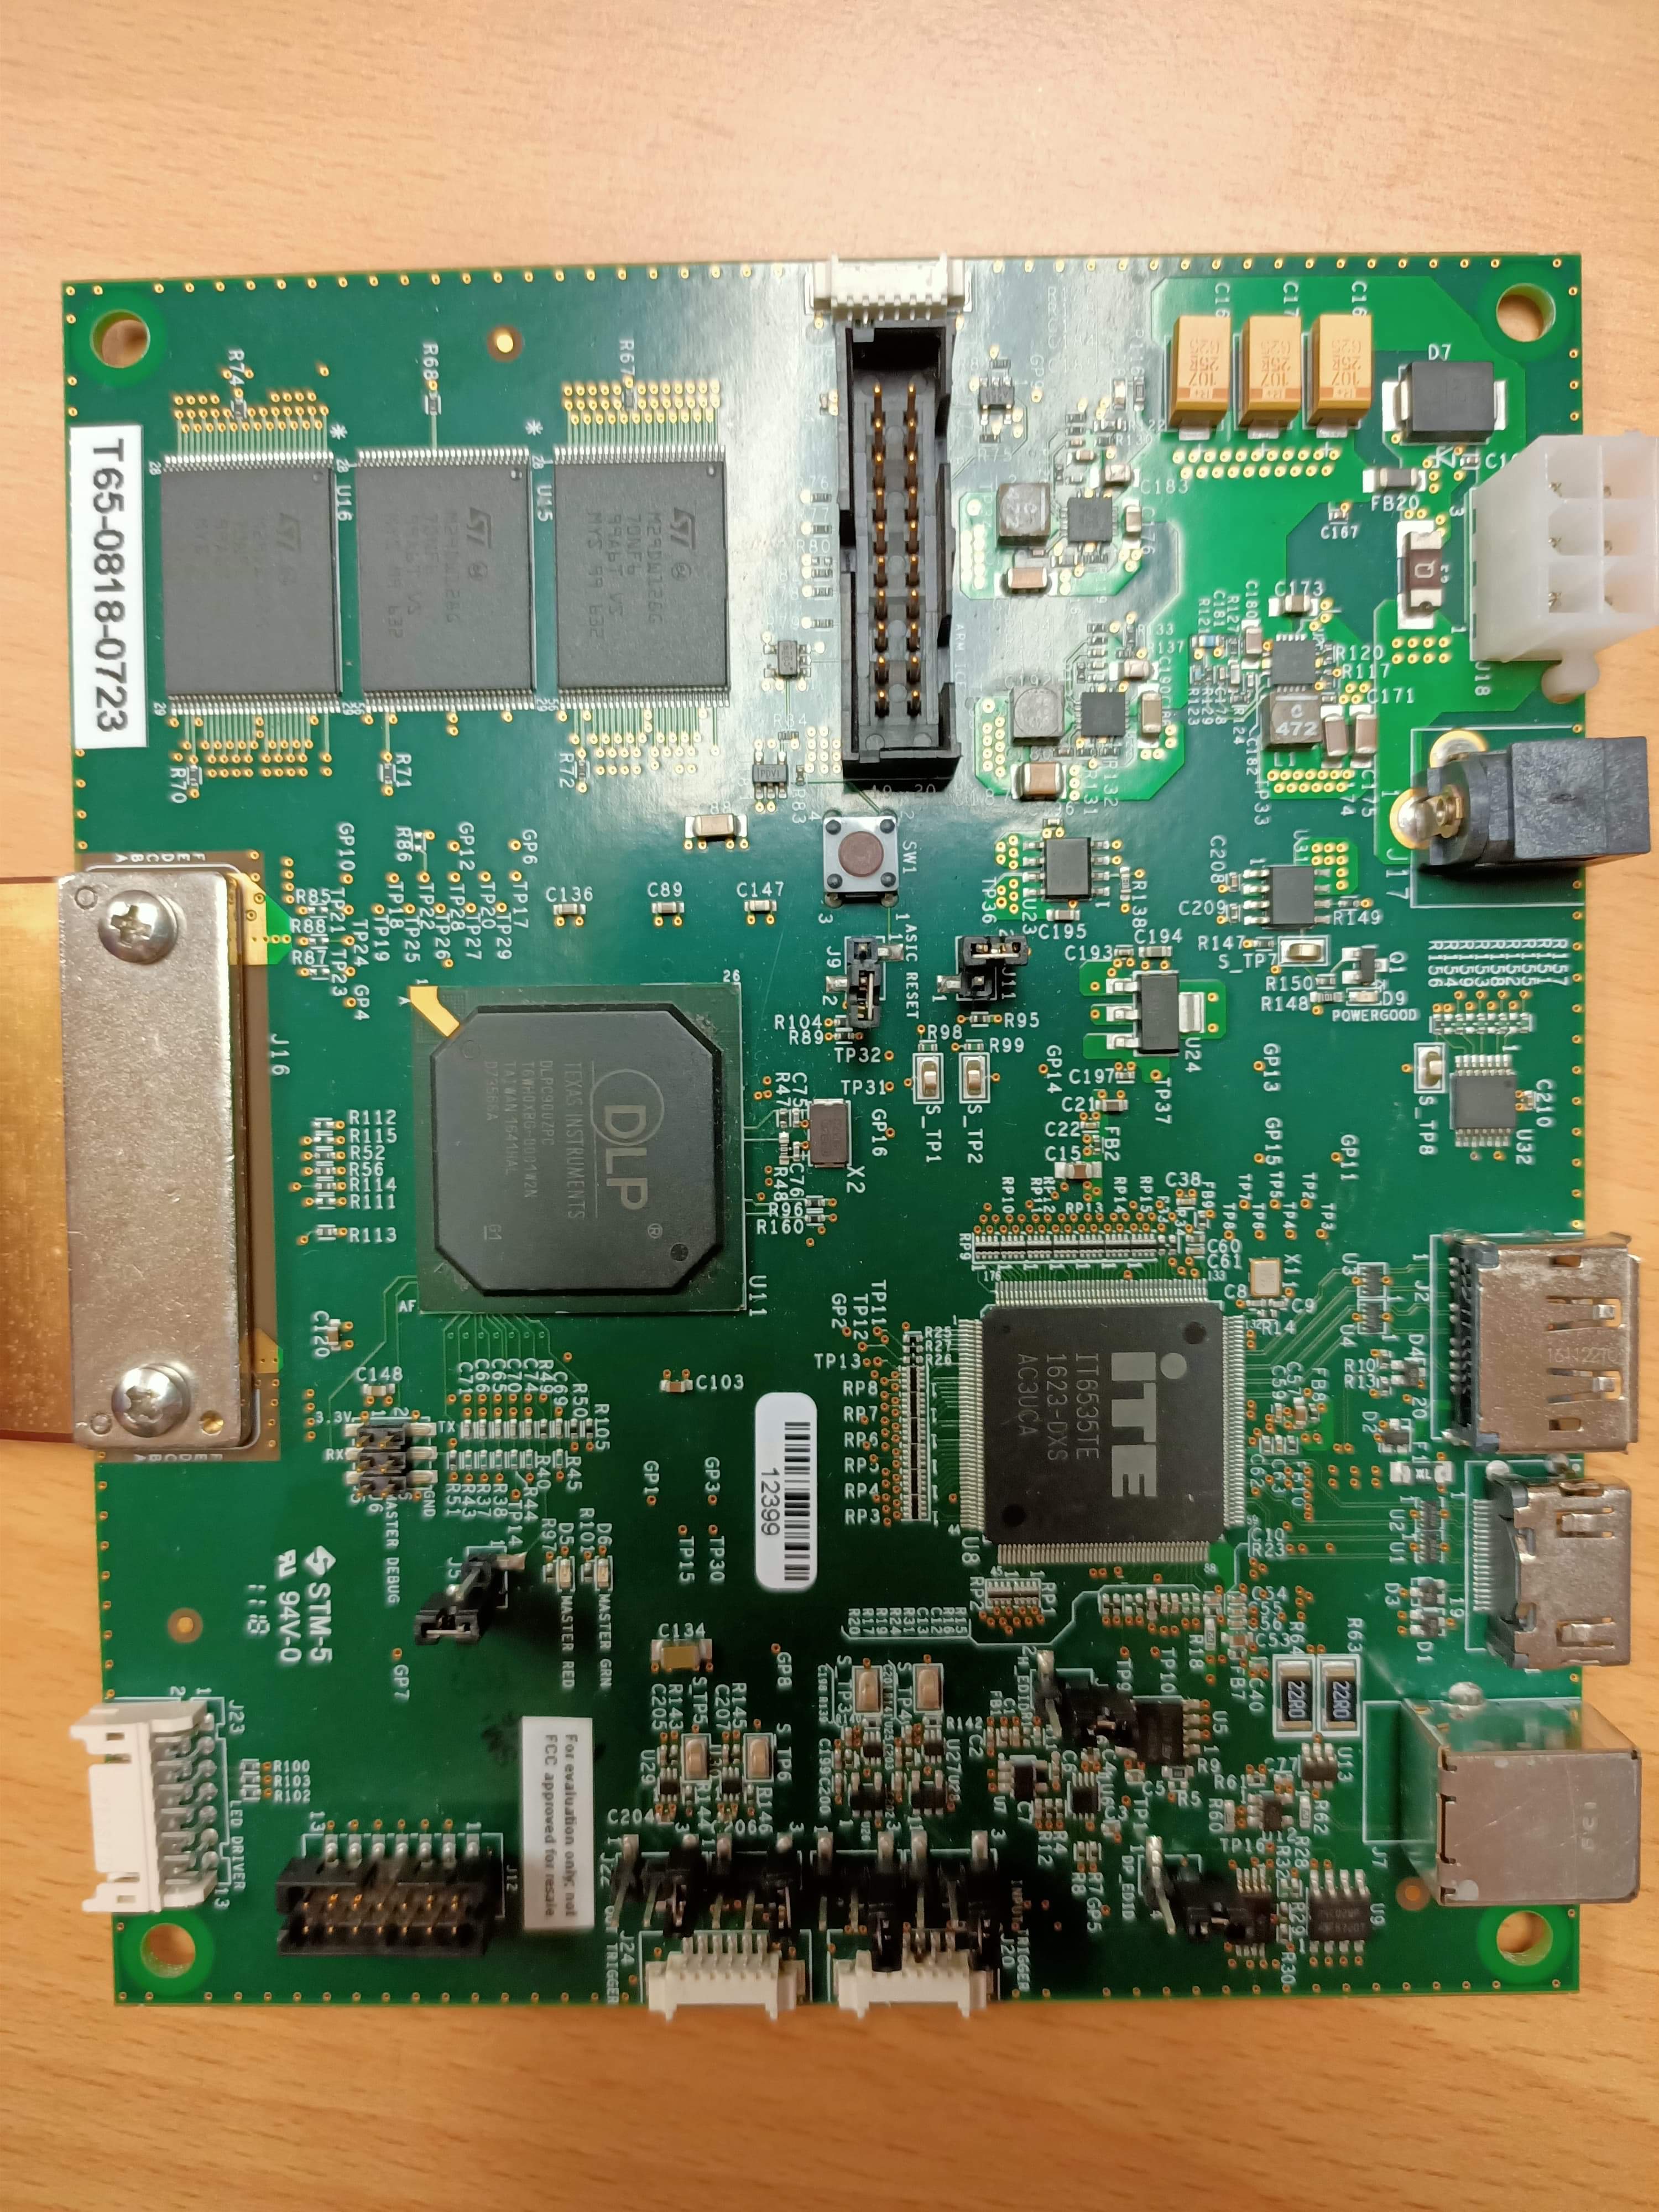 DLPC900: Replacement of DLPC900 Control Board - DLP products forum ...